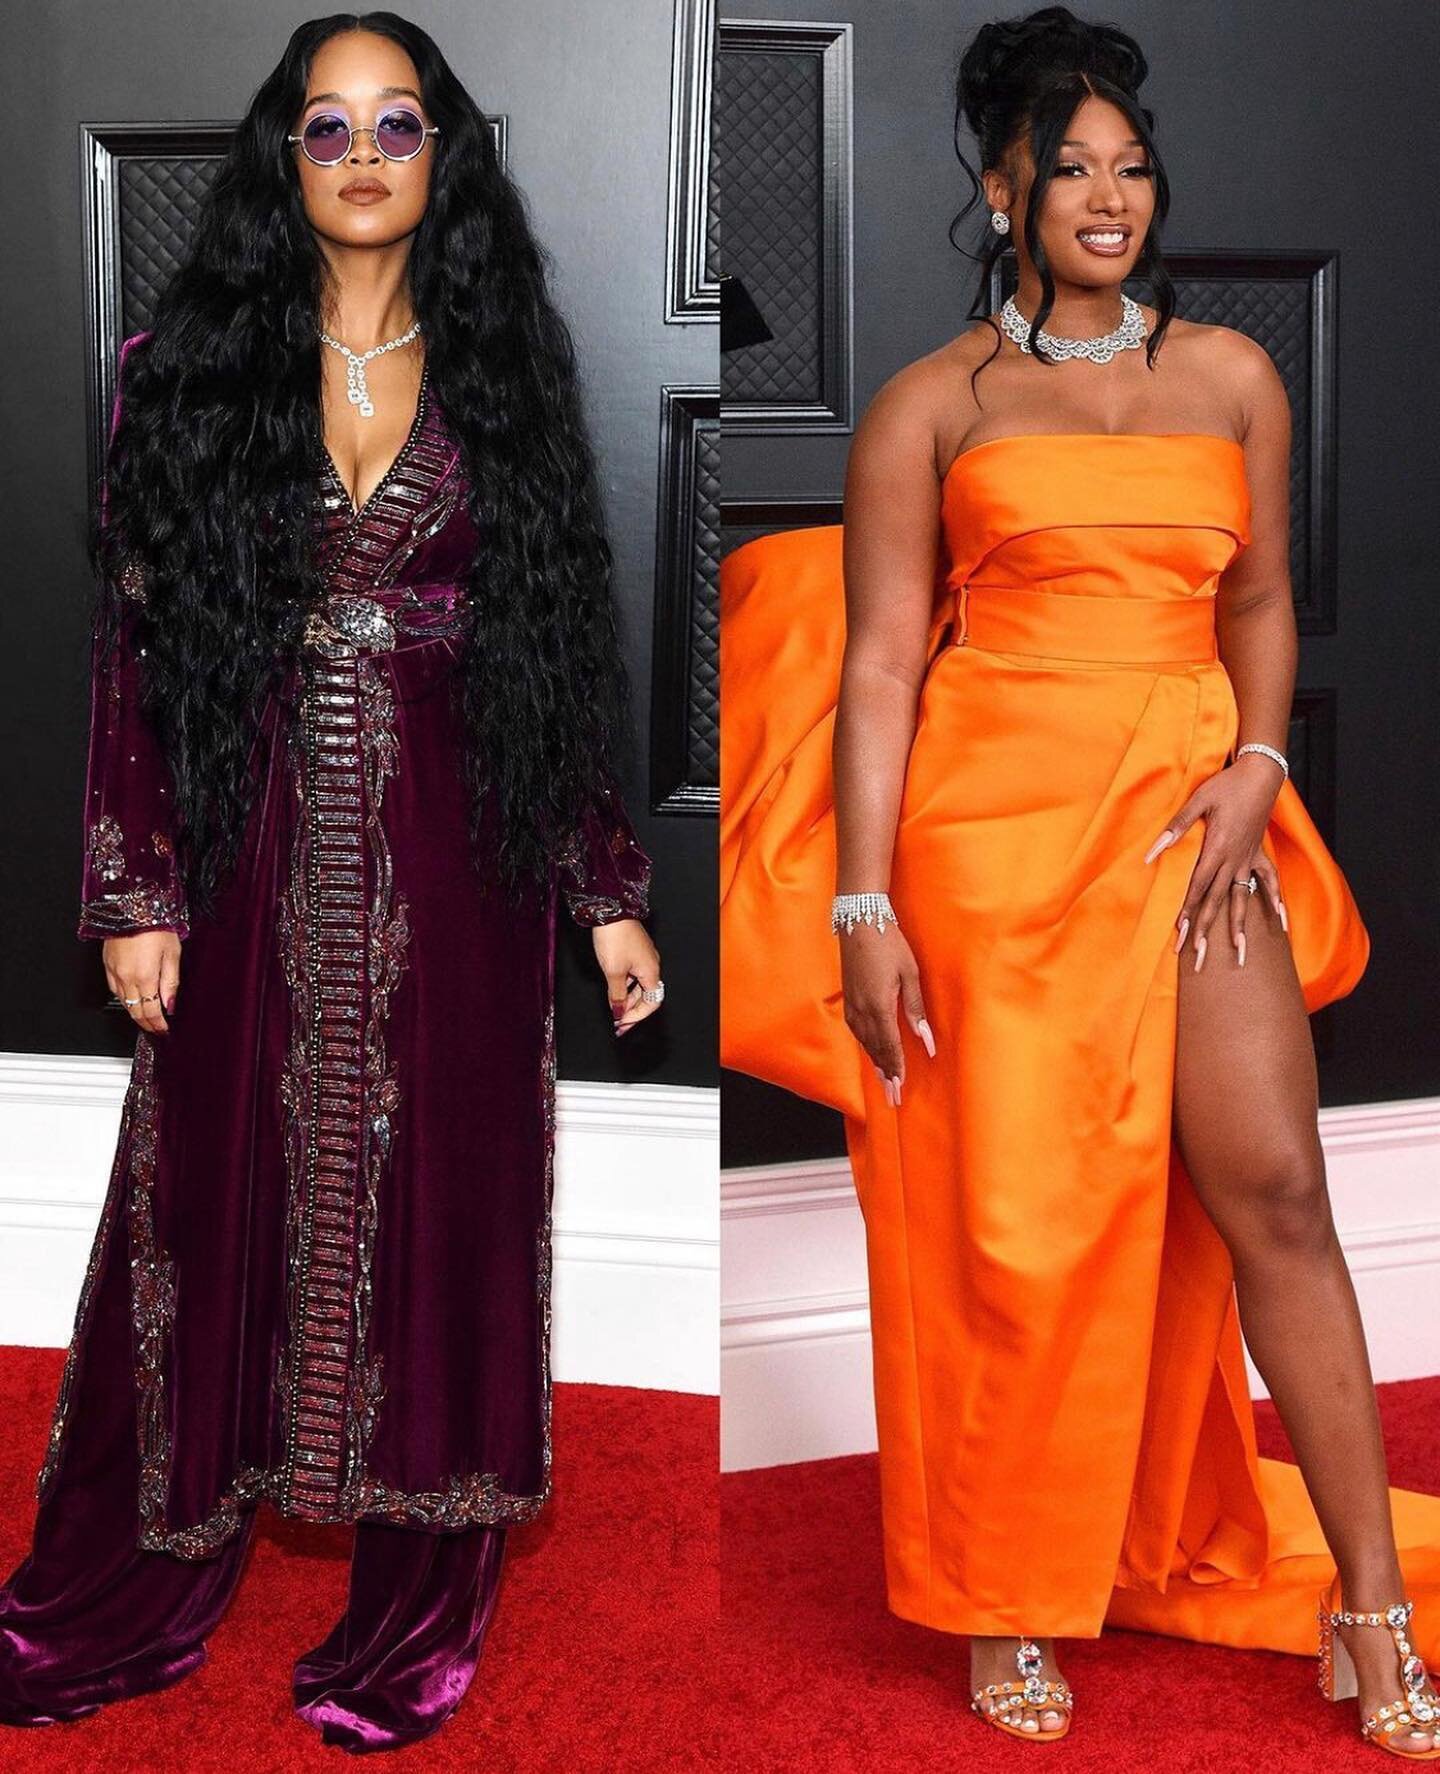 the Grammy looks to end all Grammy looks 
@gettyimages @thecut @vanityfair